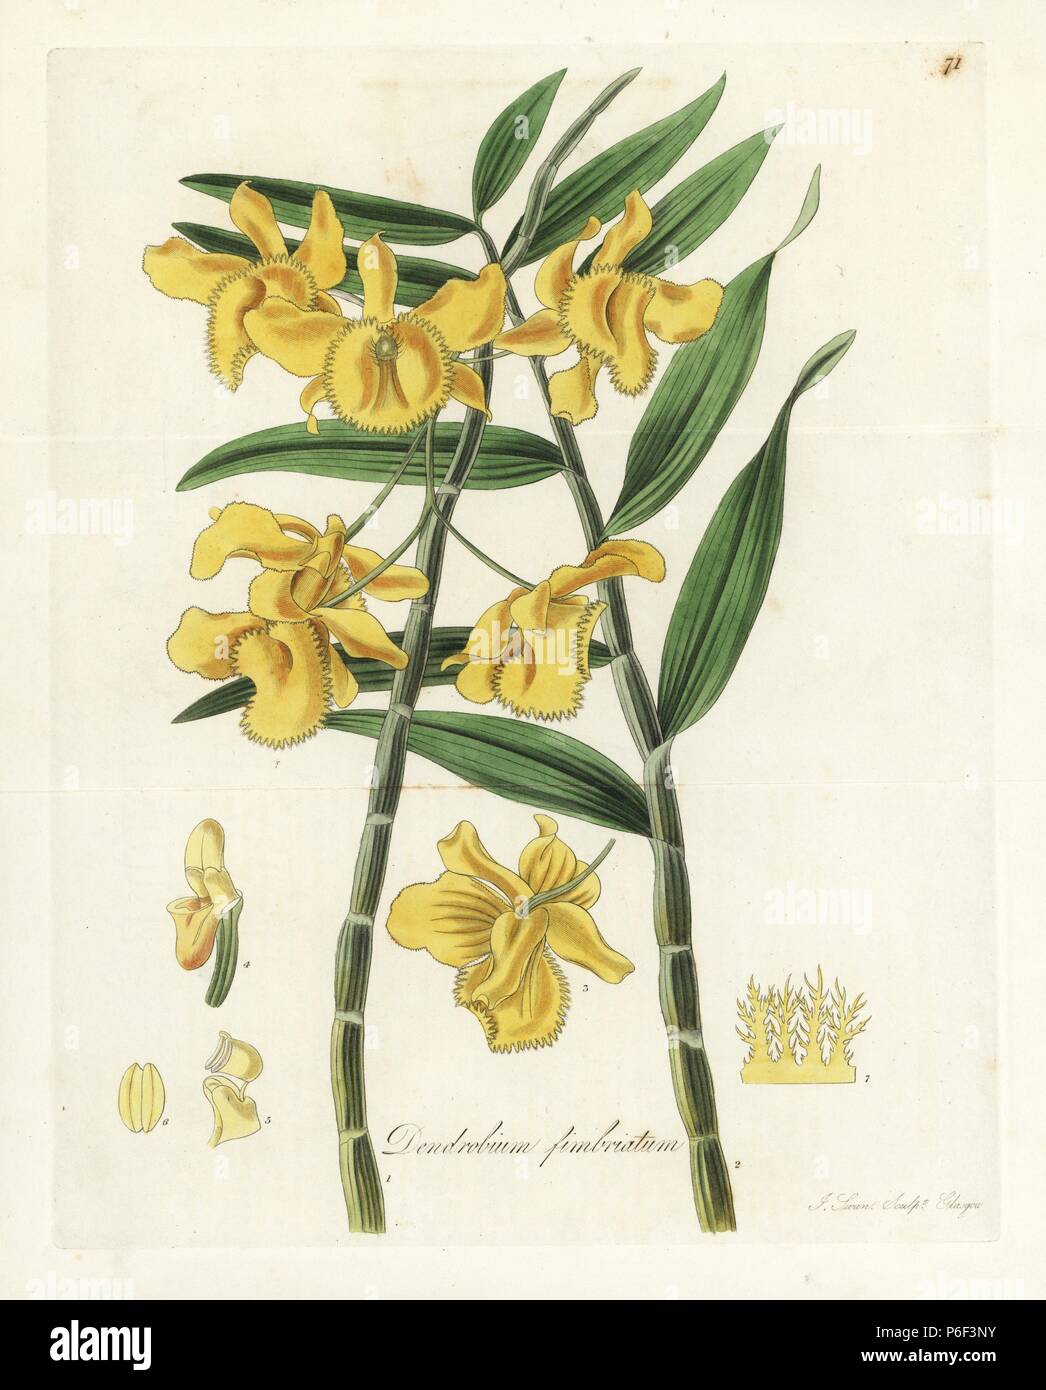 Fringed-lipped or fringed dendrobium orchid, Dendrobium fimbriatum. Handcoloured copperplate engraving by J. Swan after a botanical illustration by William Jackson Hooker from his own 'Exotic Flora,' Blackwood, Edinburgh, 1823. Hooker (1785-1865) was an English botanist who specialized in orchids and ferns, and was director of the Royal Botanical Gardens at Kew from 1841. Stock Photo